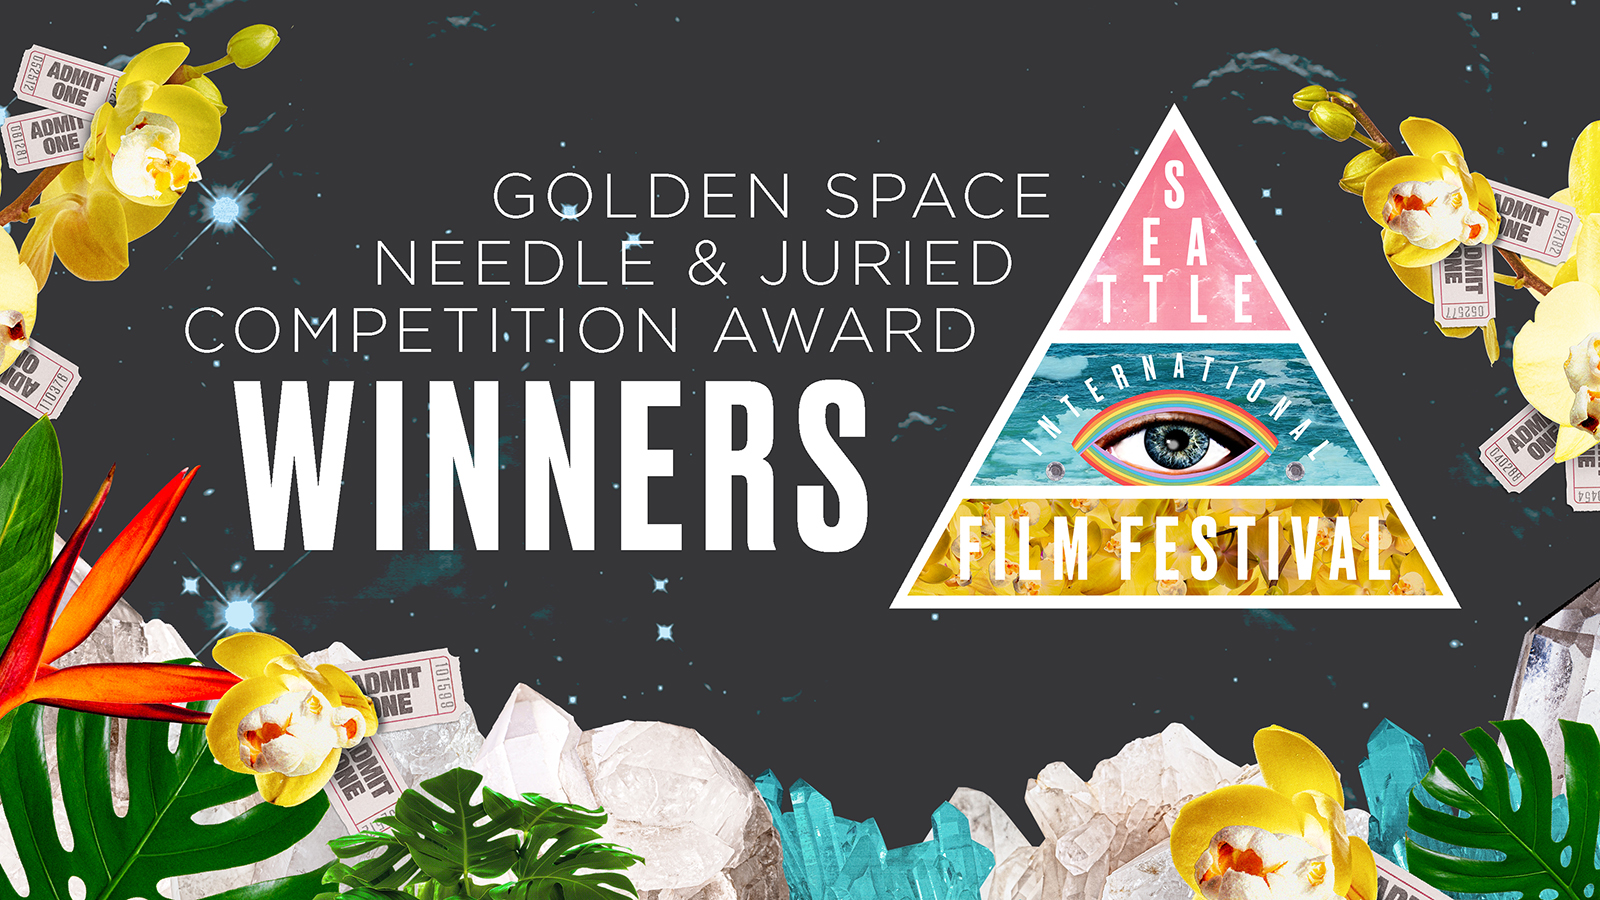 Golden Space Needle Audience Awards and Juried Award Winners